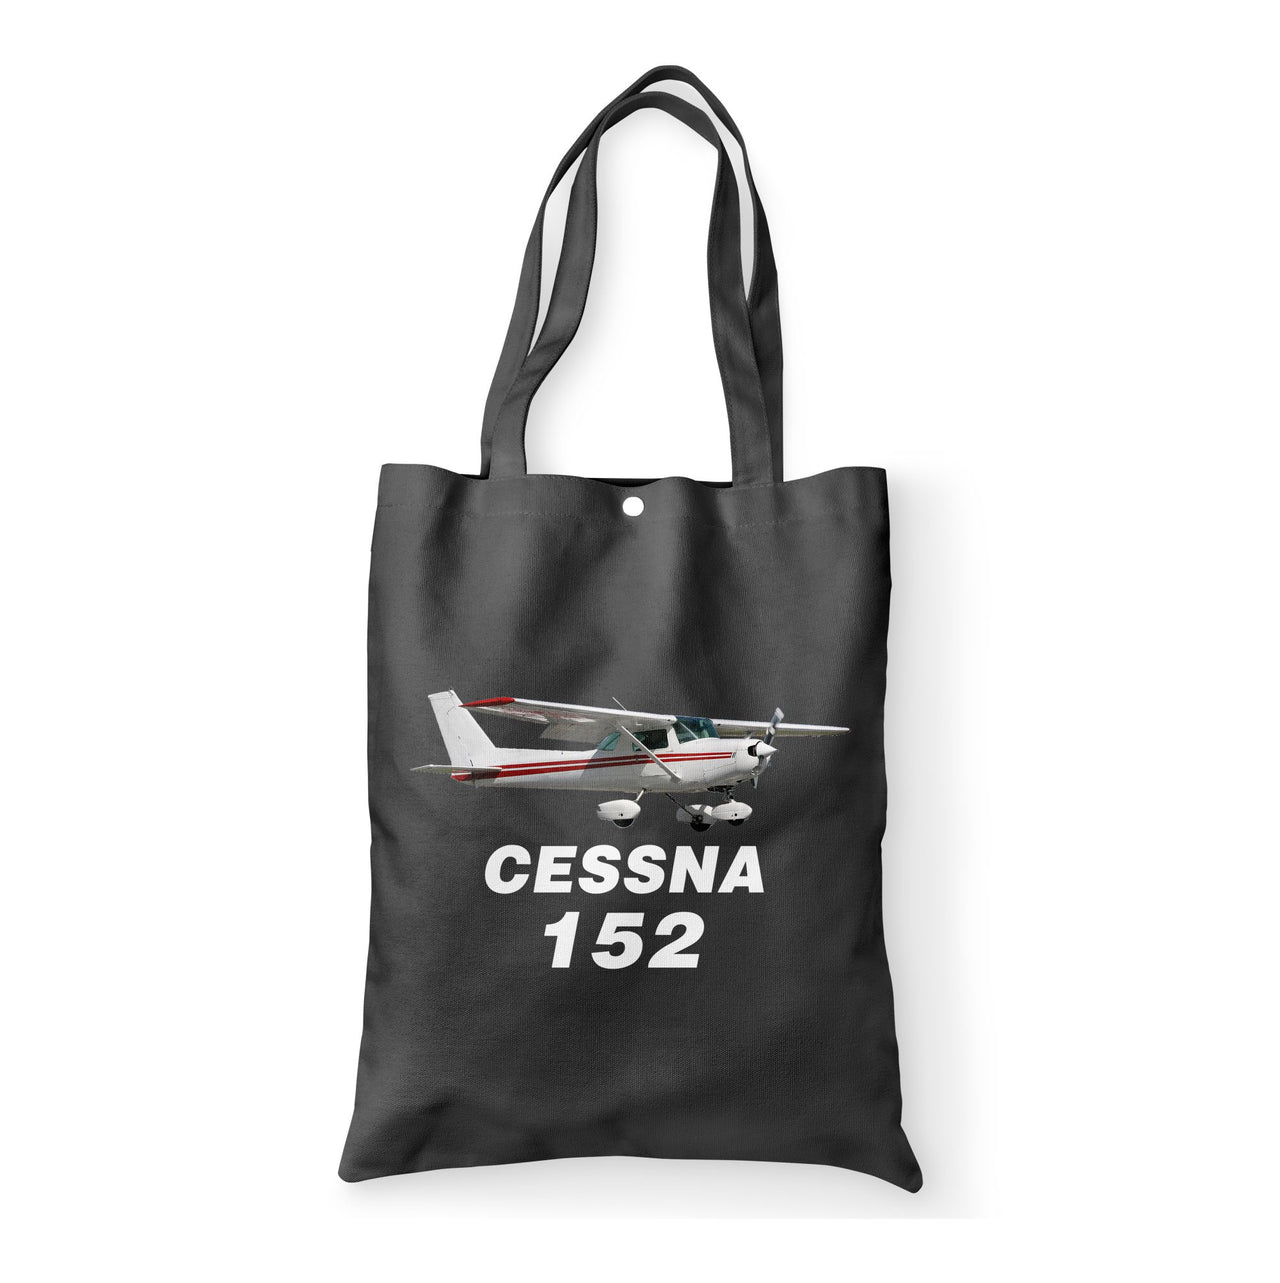 The Cessna 152 Designed Tote Bags